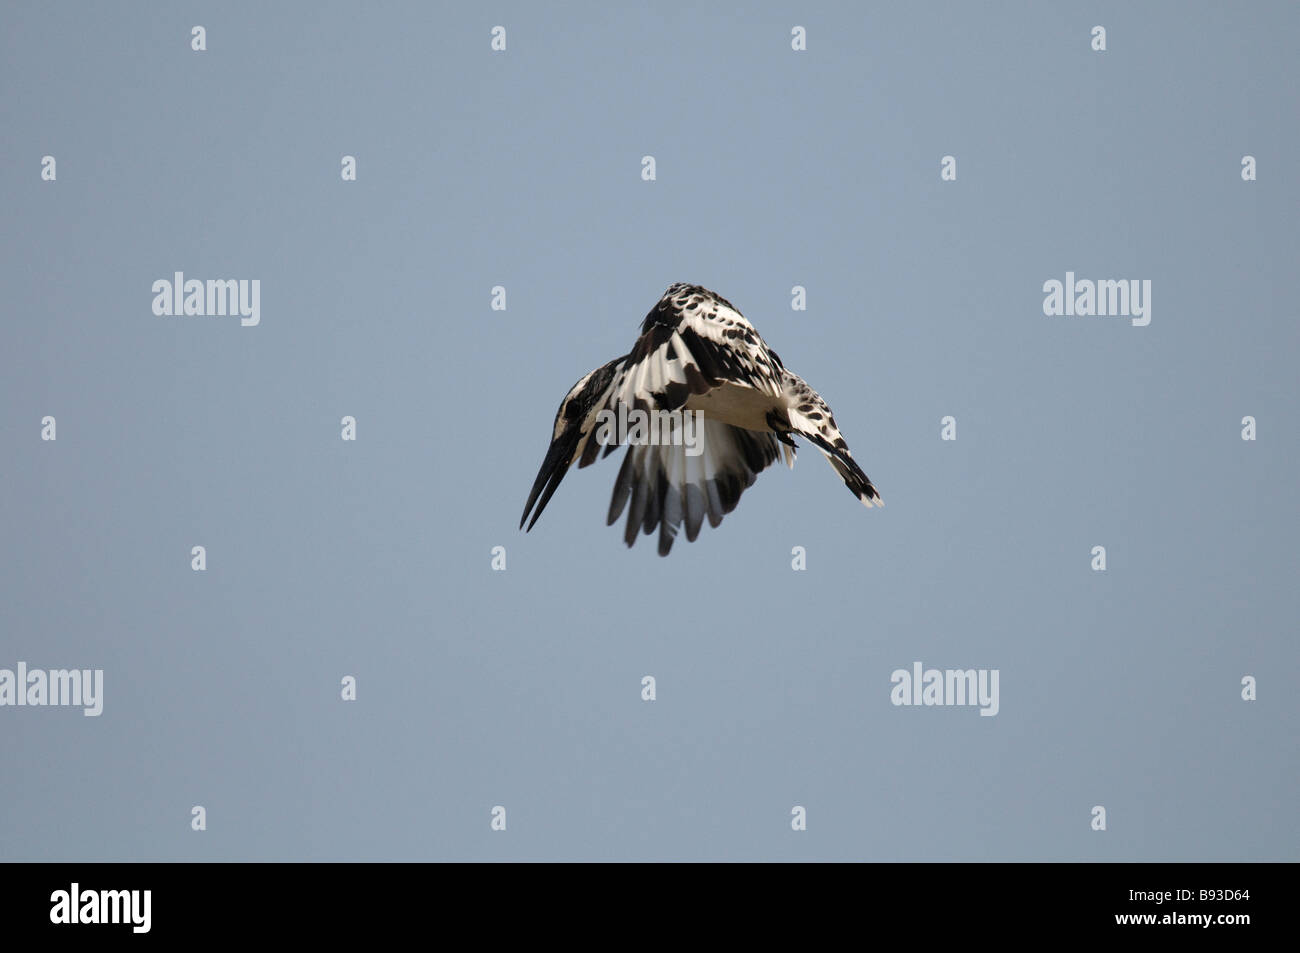 Pied Kingfisher Ceryle rudis hovering in Rajasthan India Stock Photo